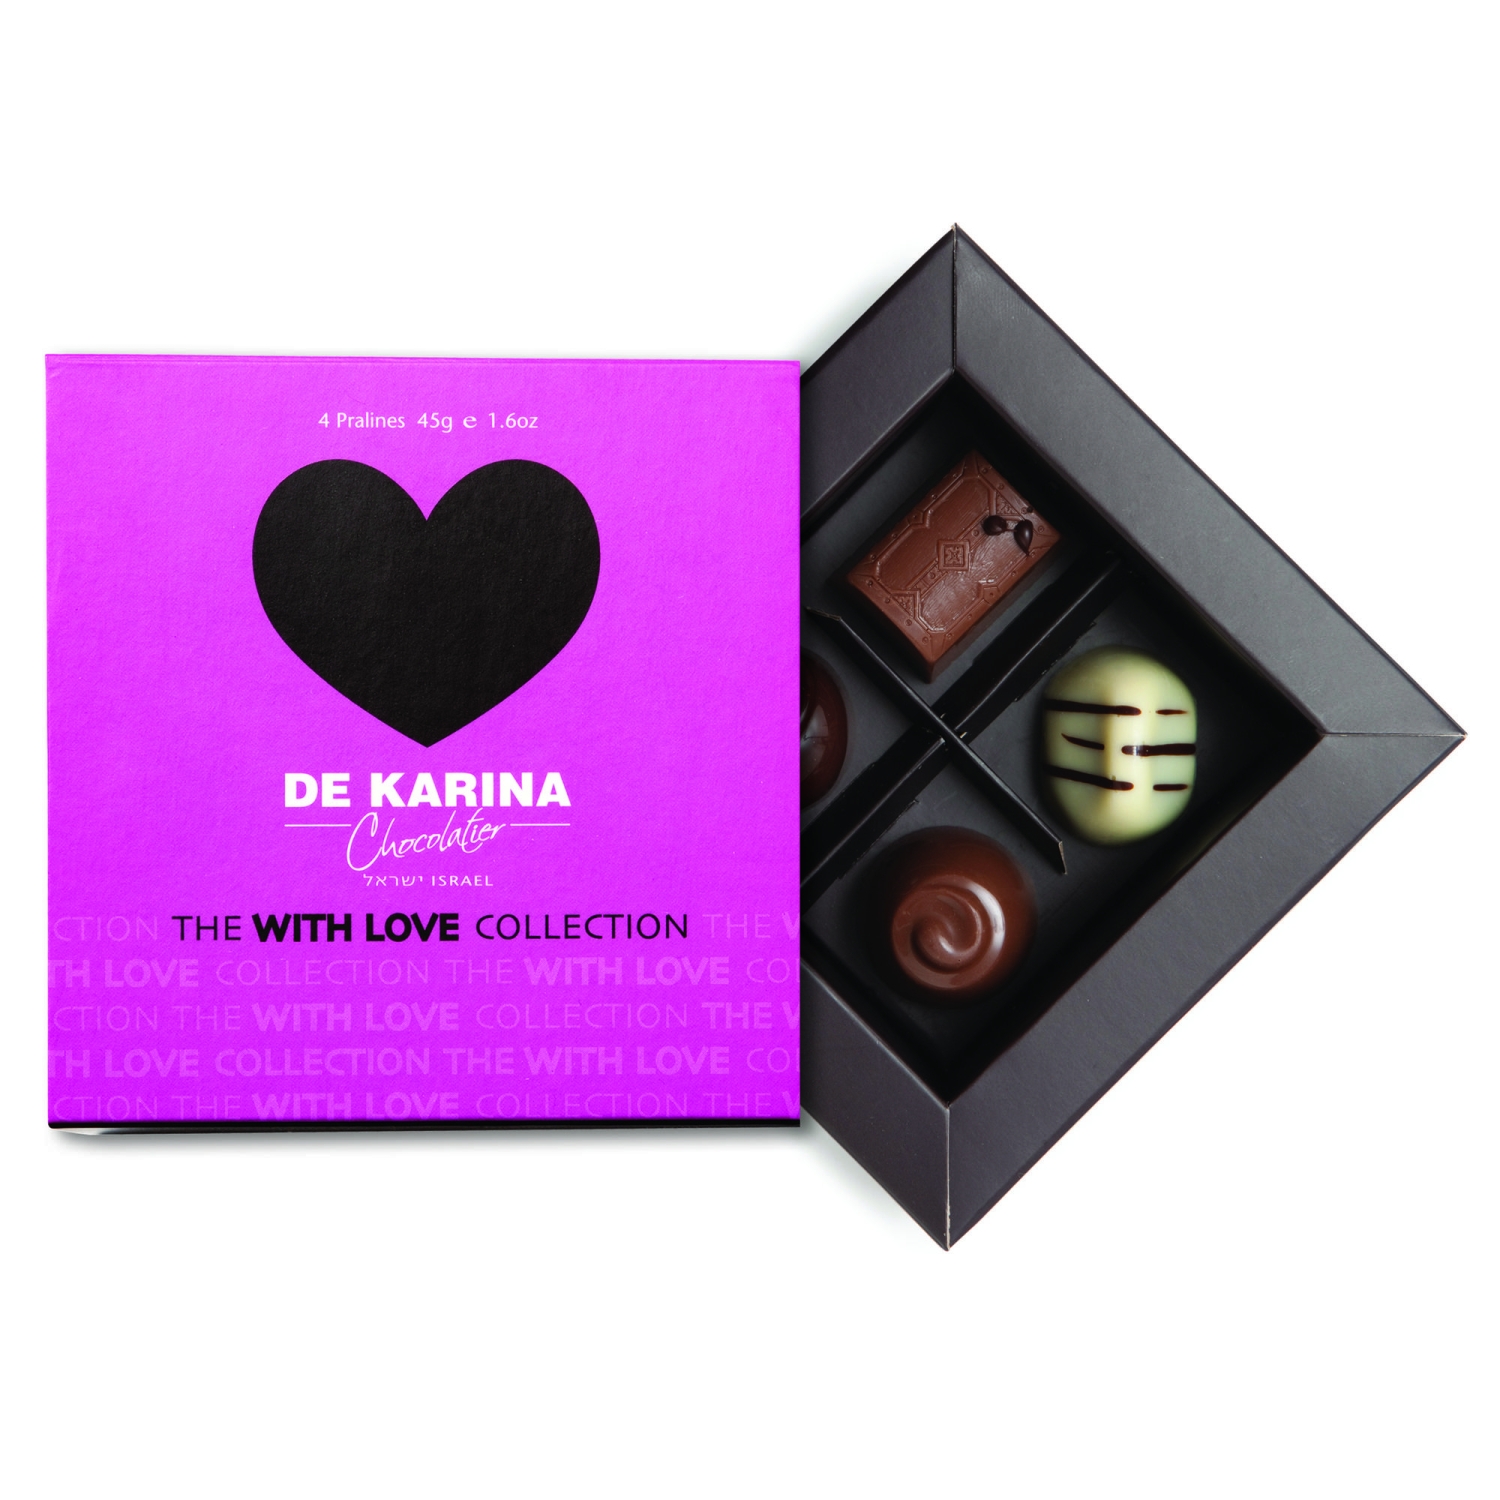 De Karina With Love Collection Handmade Pralines (Box of 4) - Pink - 1